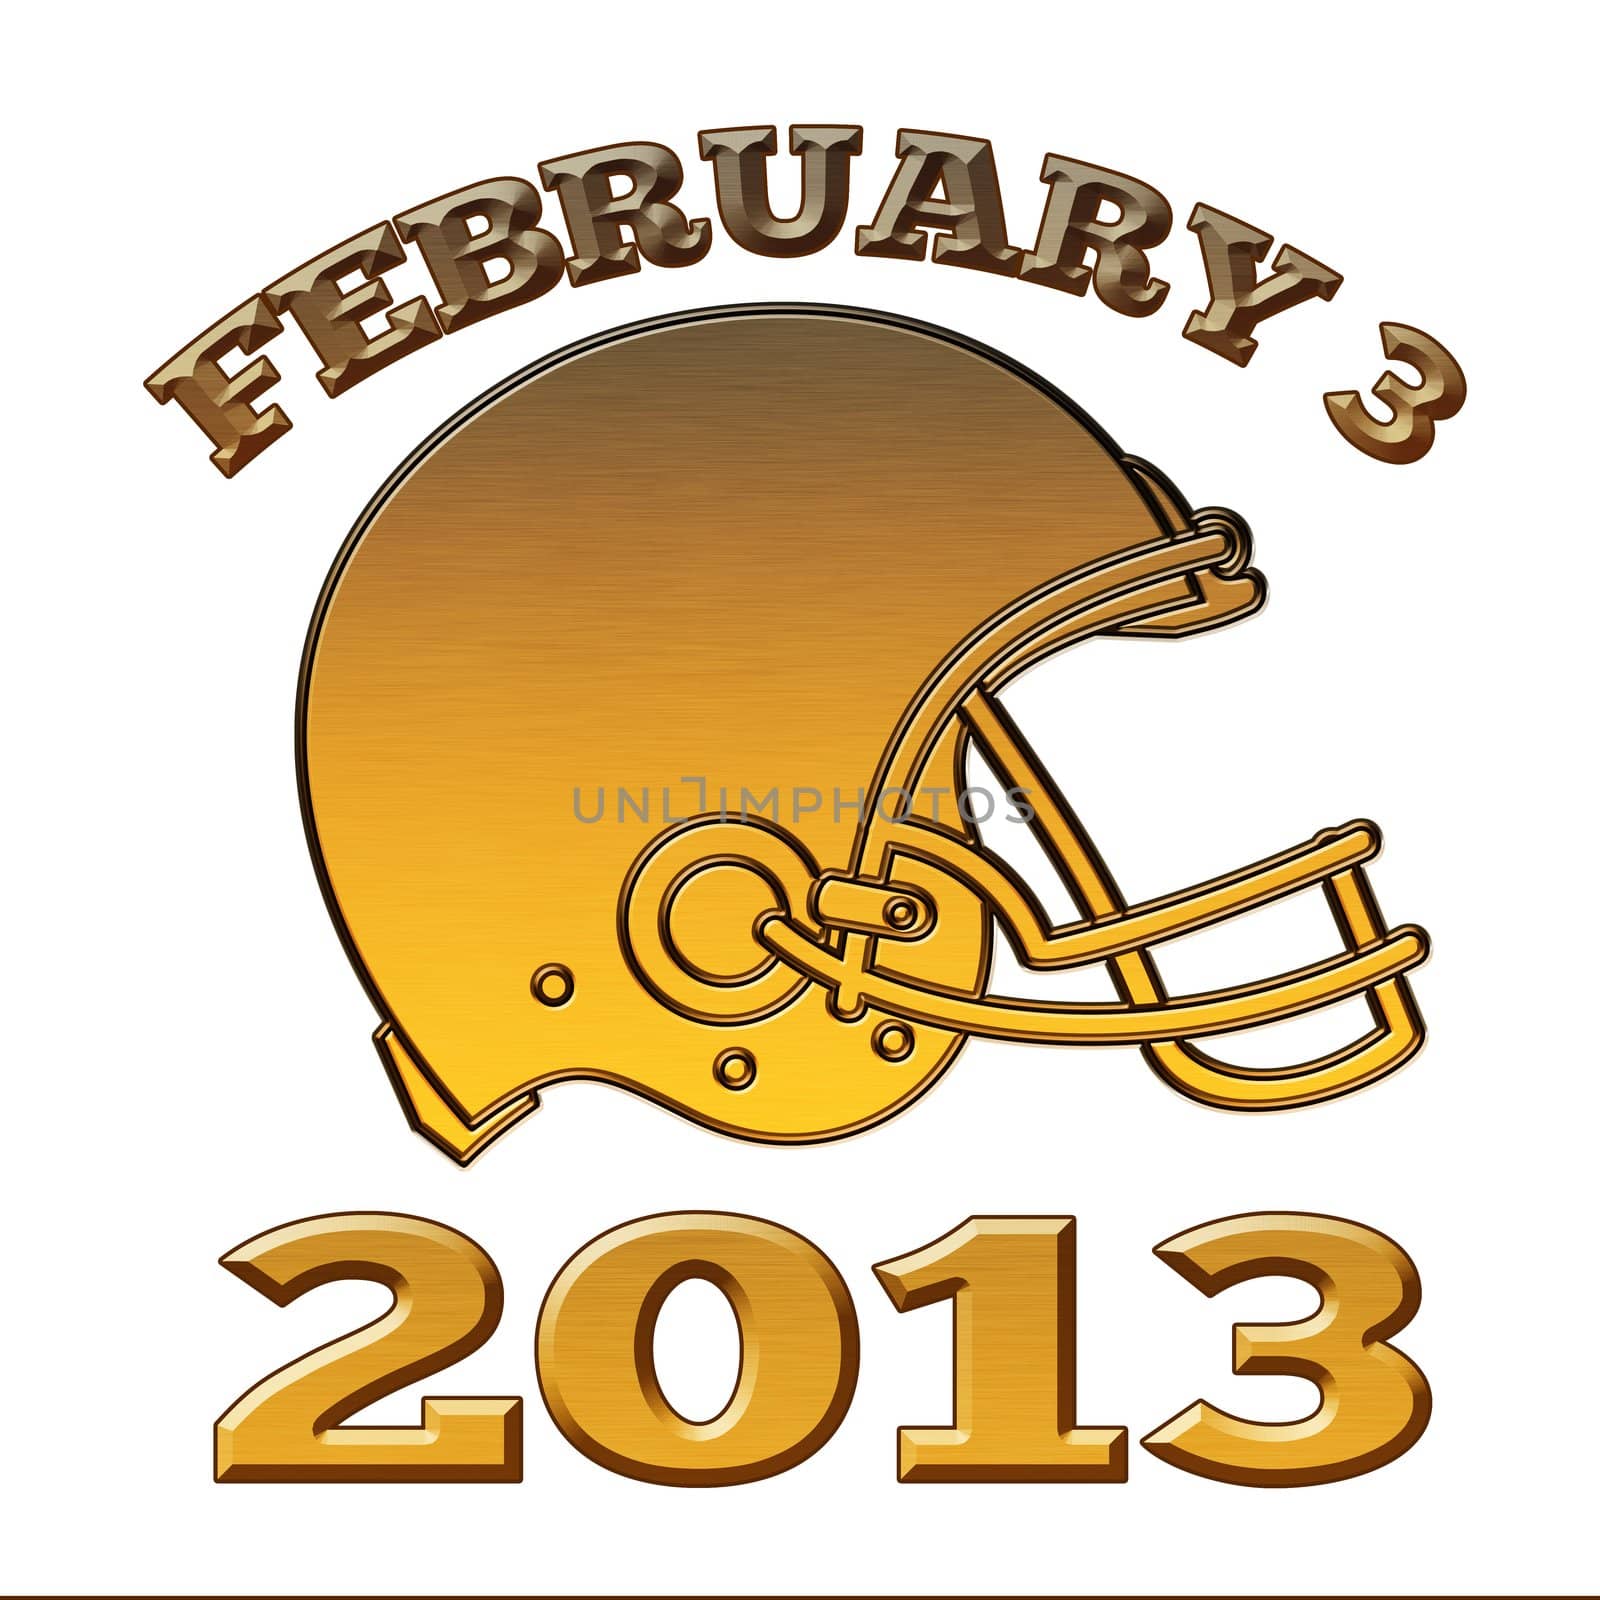 illustration of a golden american football helmet viewed from side done in metallic gold style on isolated white background with words February 3, 2013